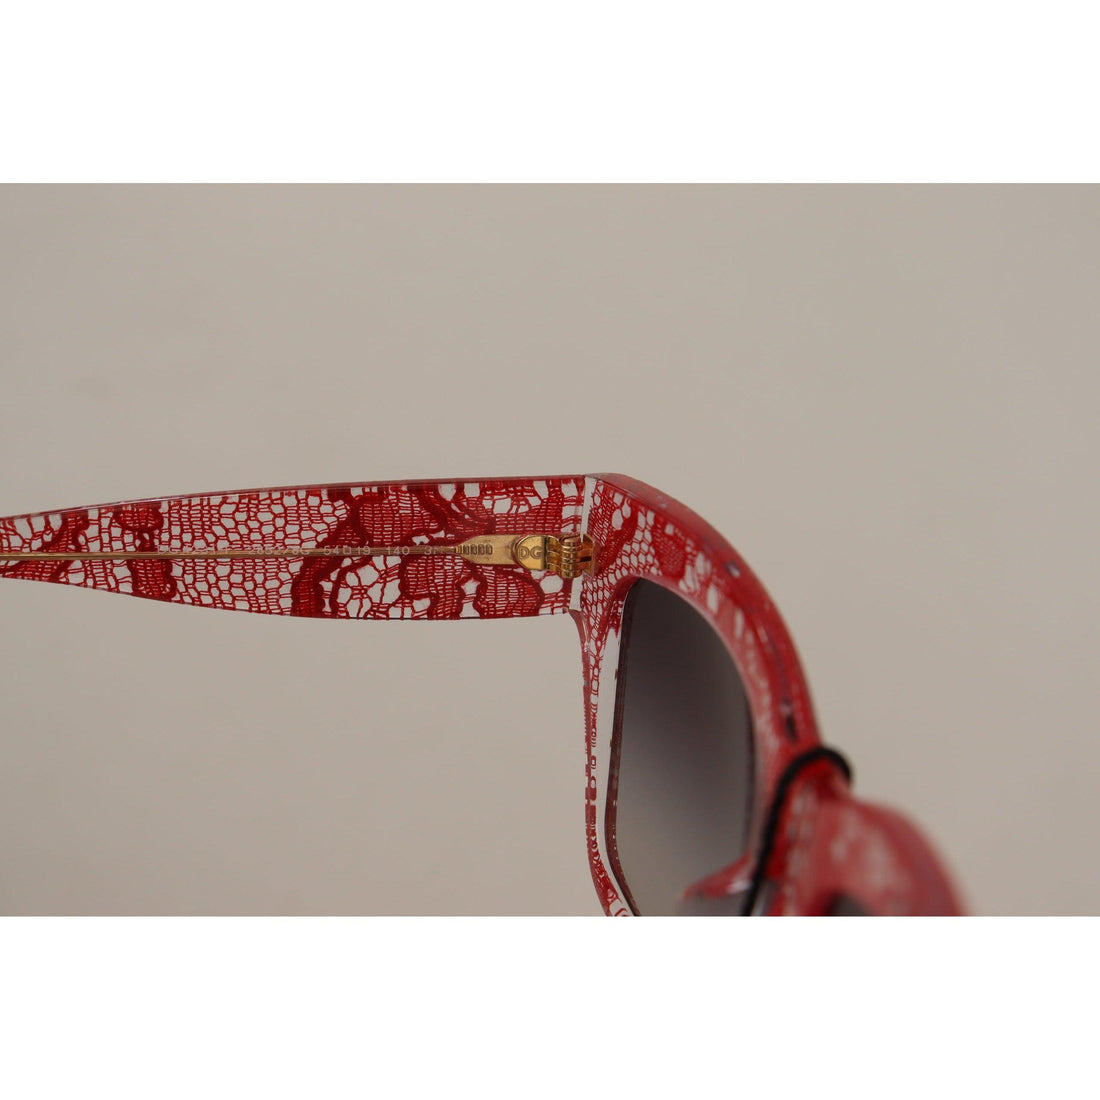 Dolce & Gabbana Red Lace Acetate Rectangle Shades Sunglasses - Paris Deluxe